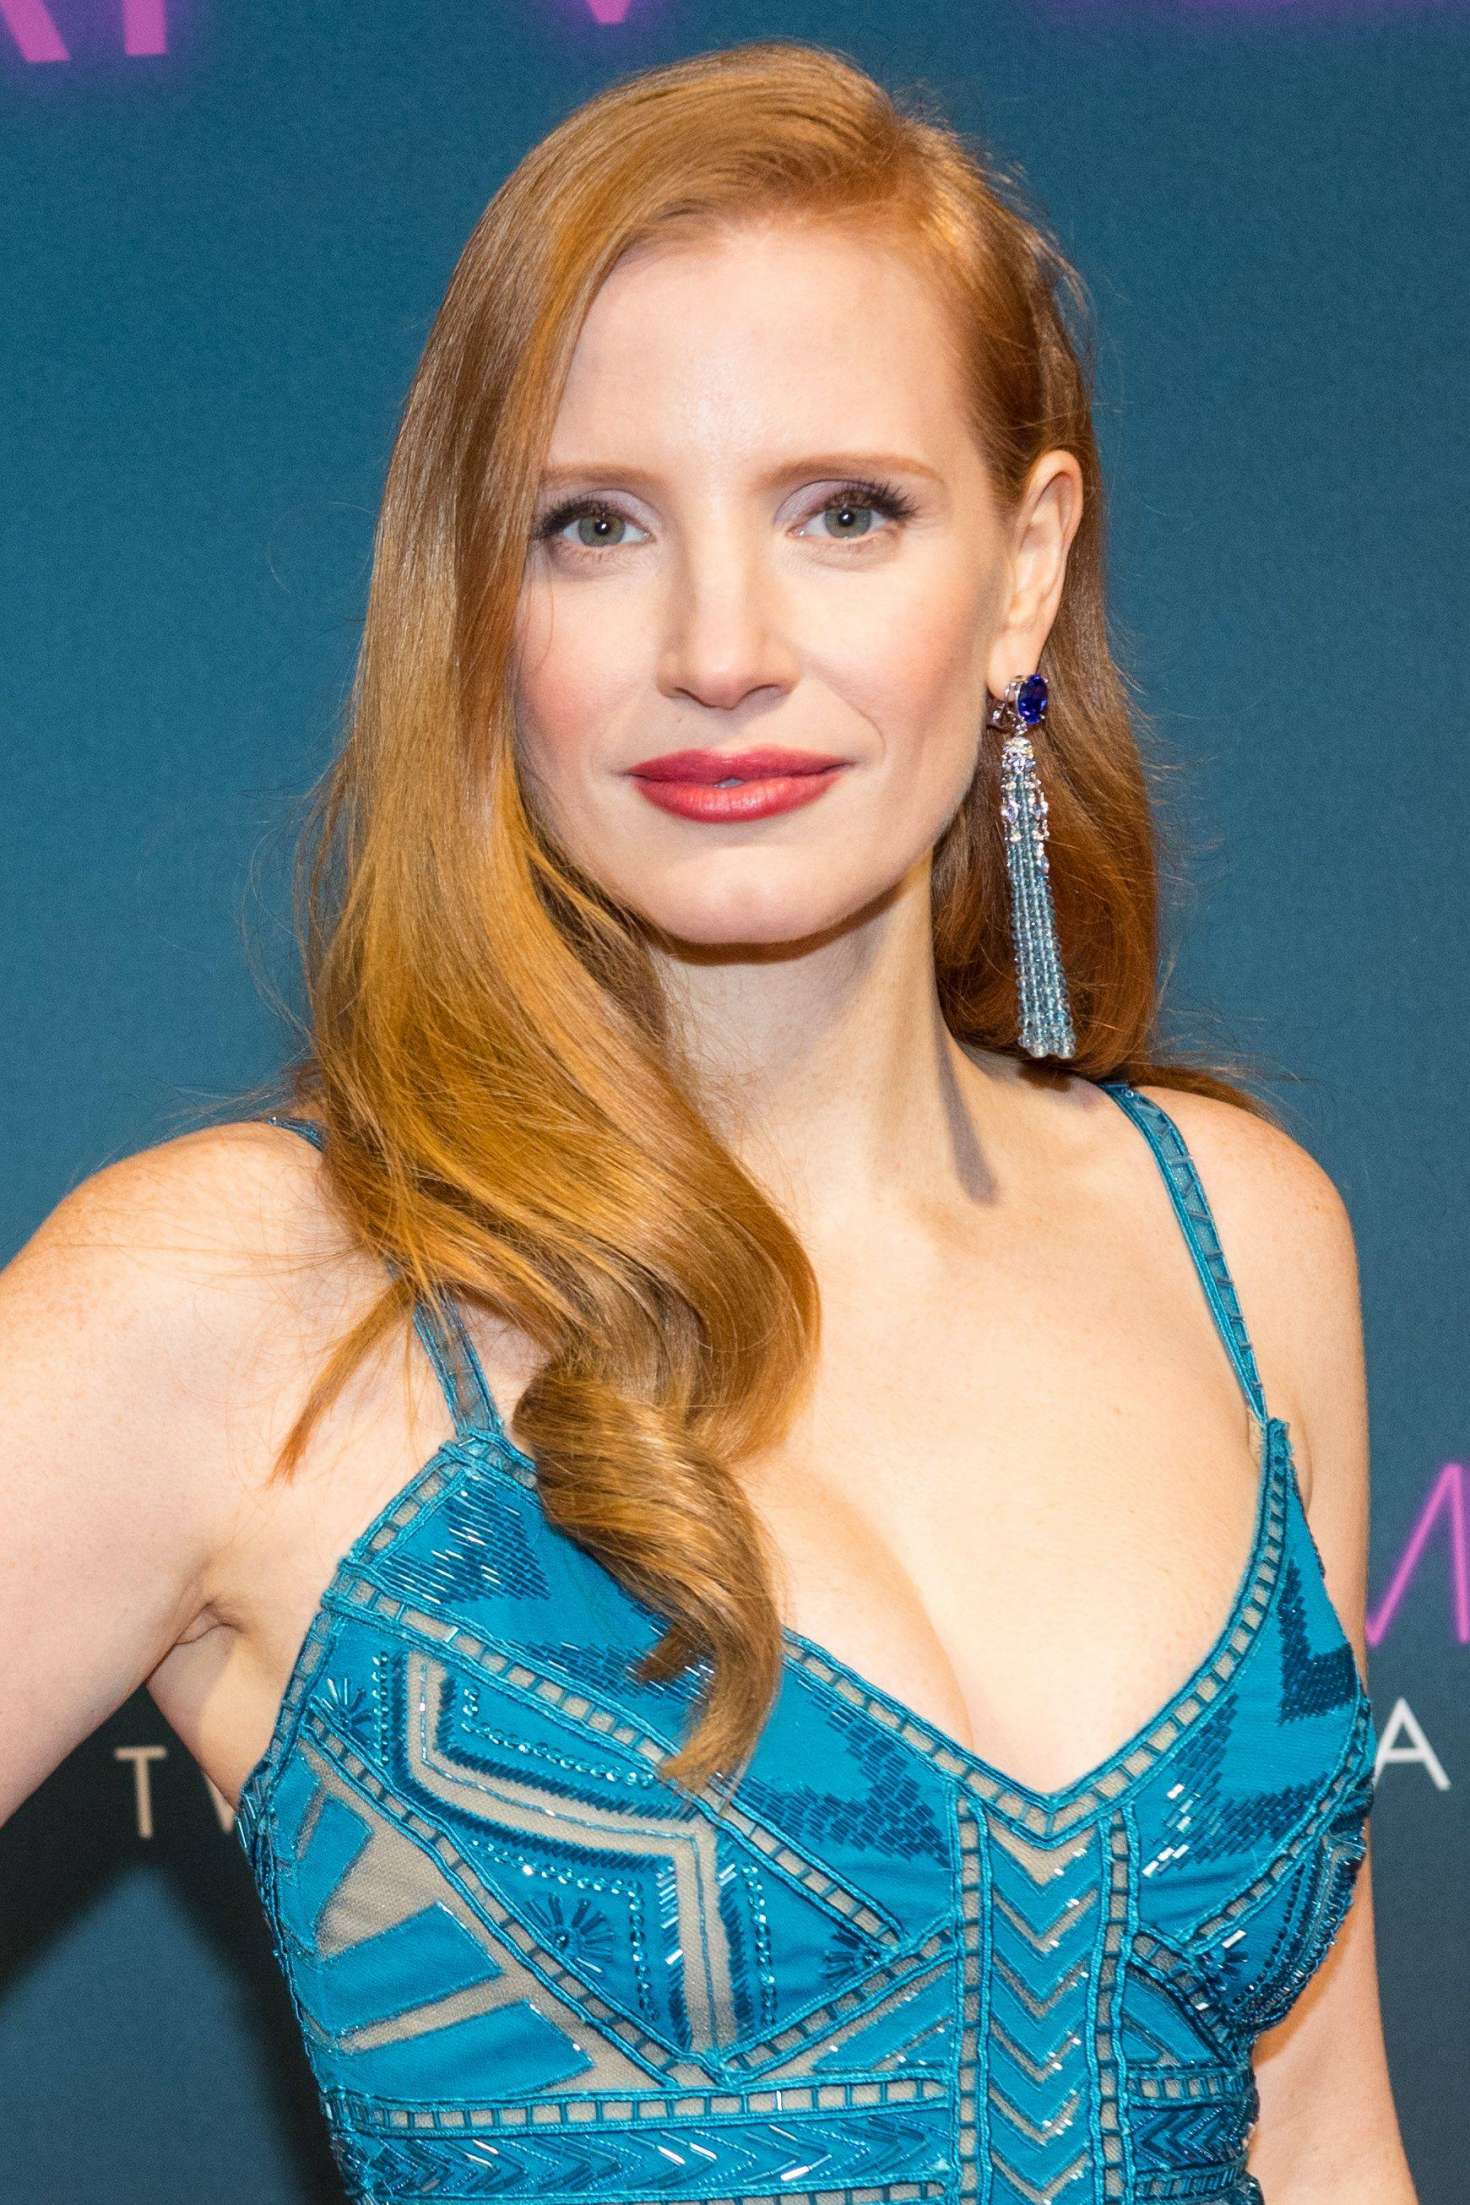 Jessica Chastain In Mollys Game Wallpapers